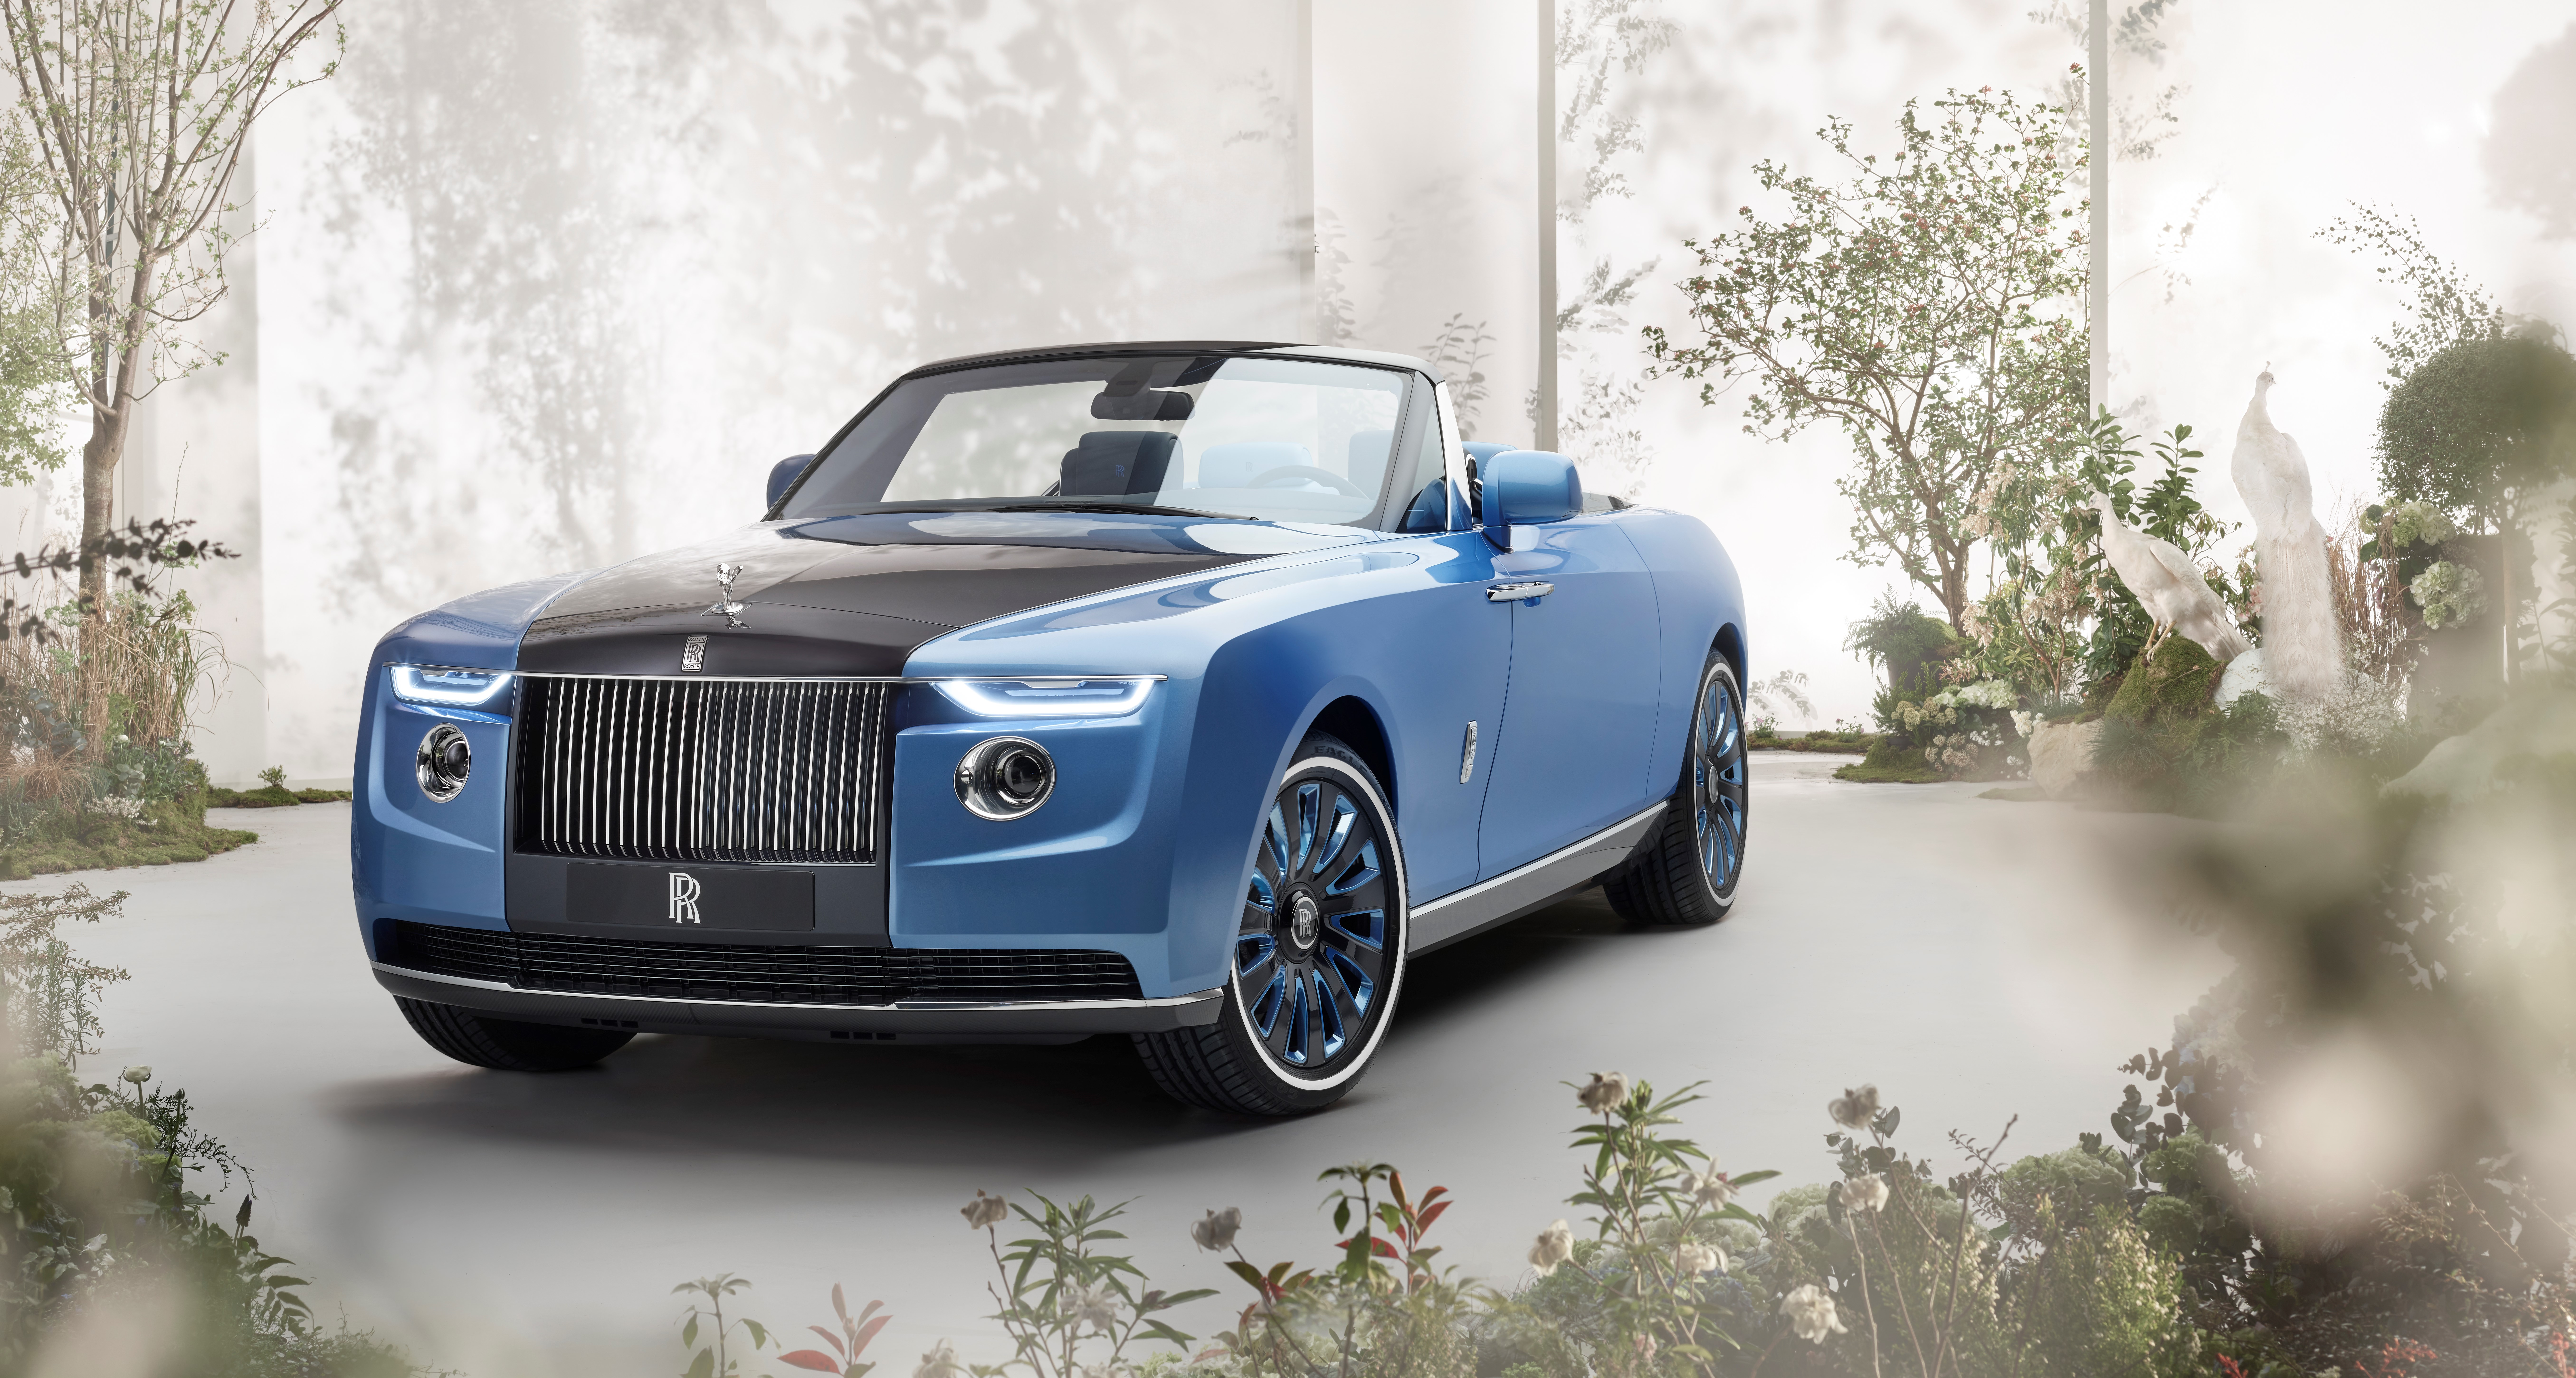 Vehicles Rolls-Royce Boat Tail HD Wallpaper | Background Image